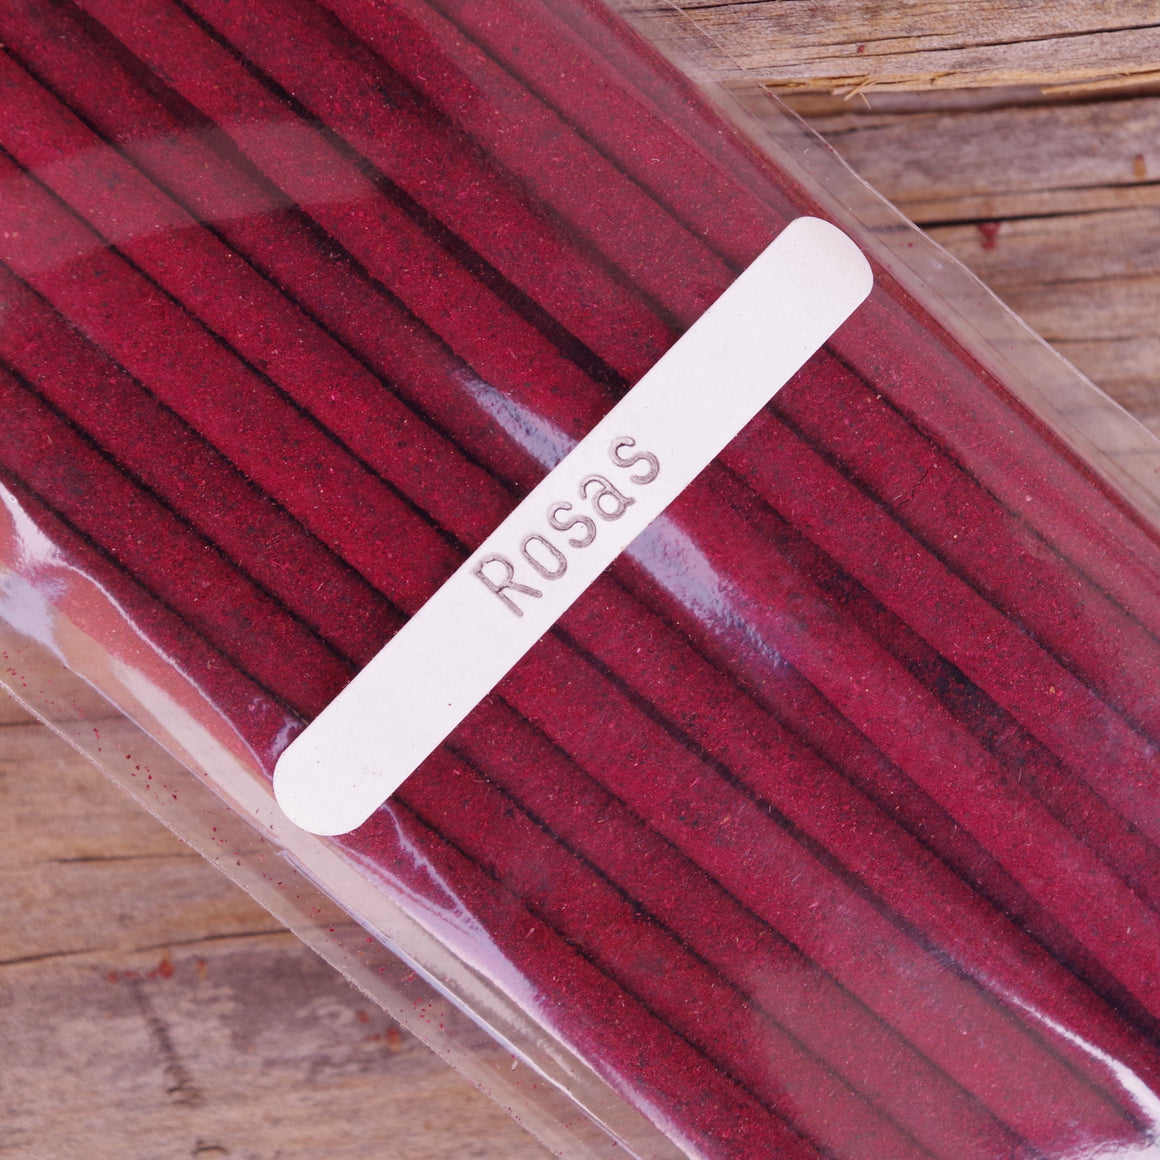 40 Rose Incense Sticks Handrolled In Mexico Long Duration 1.5 hours